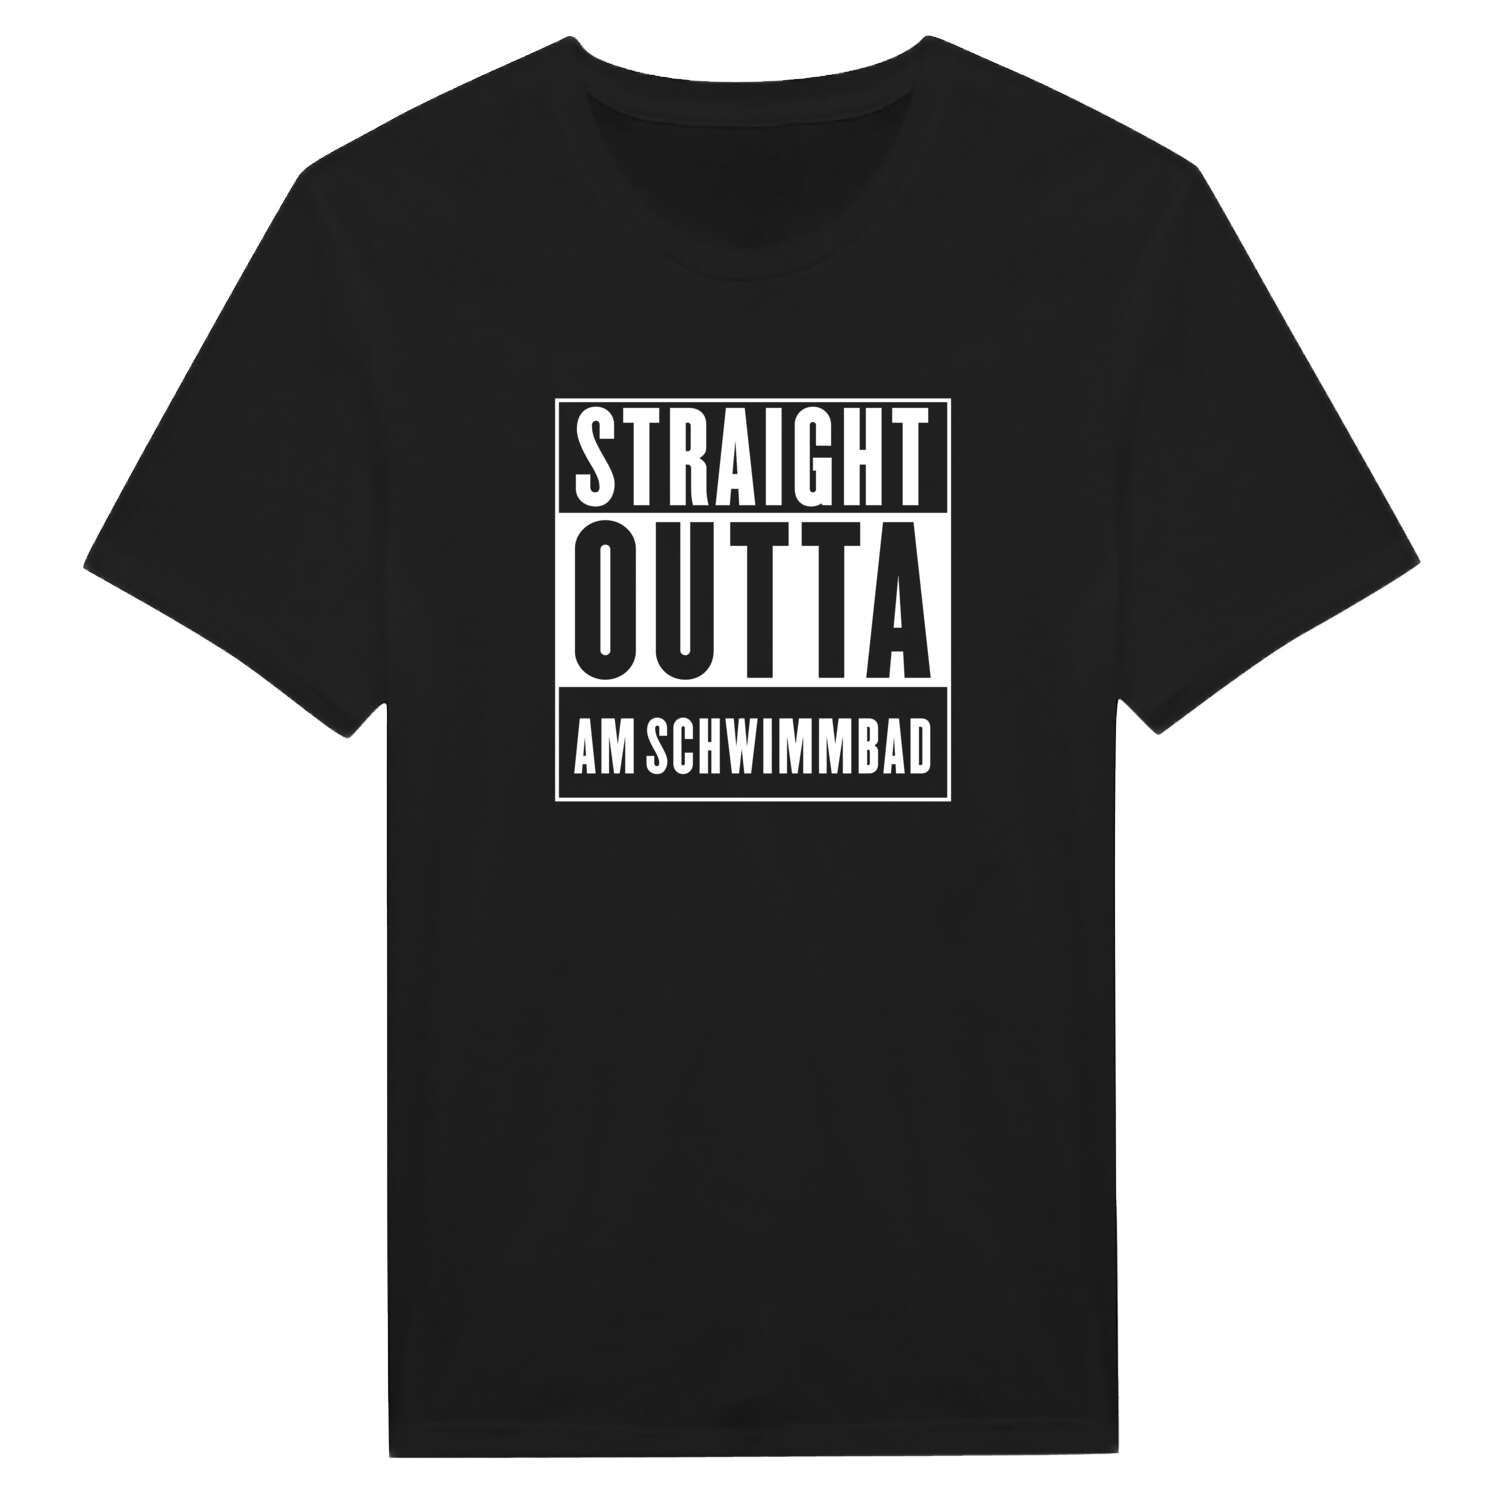 Am Schwimmbad T-Shirt »Straight Outta«